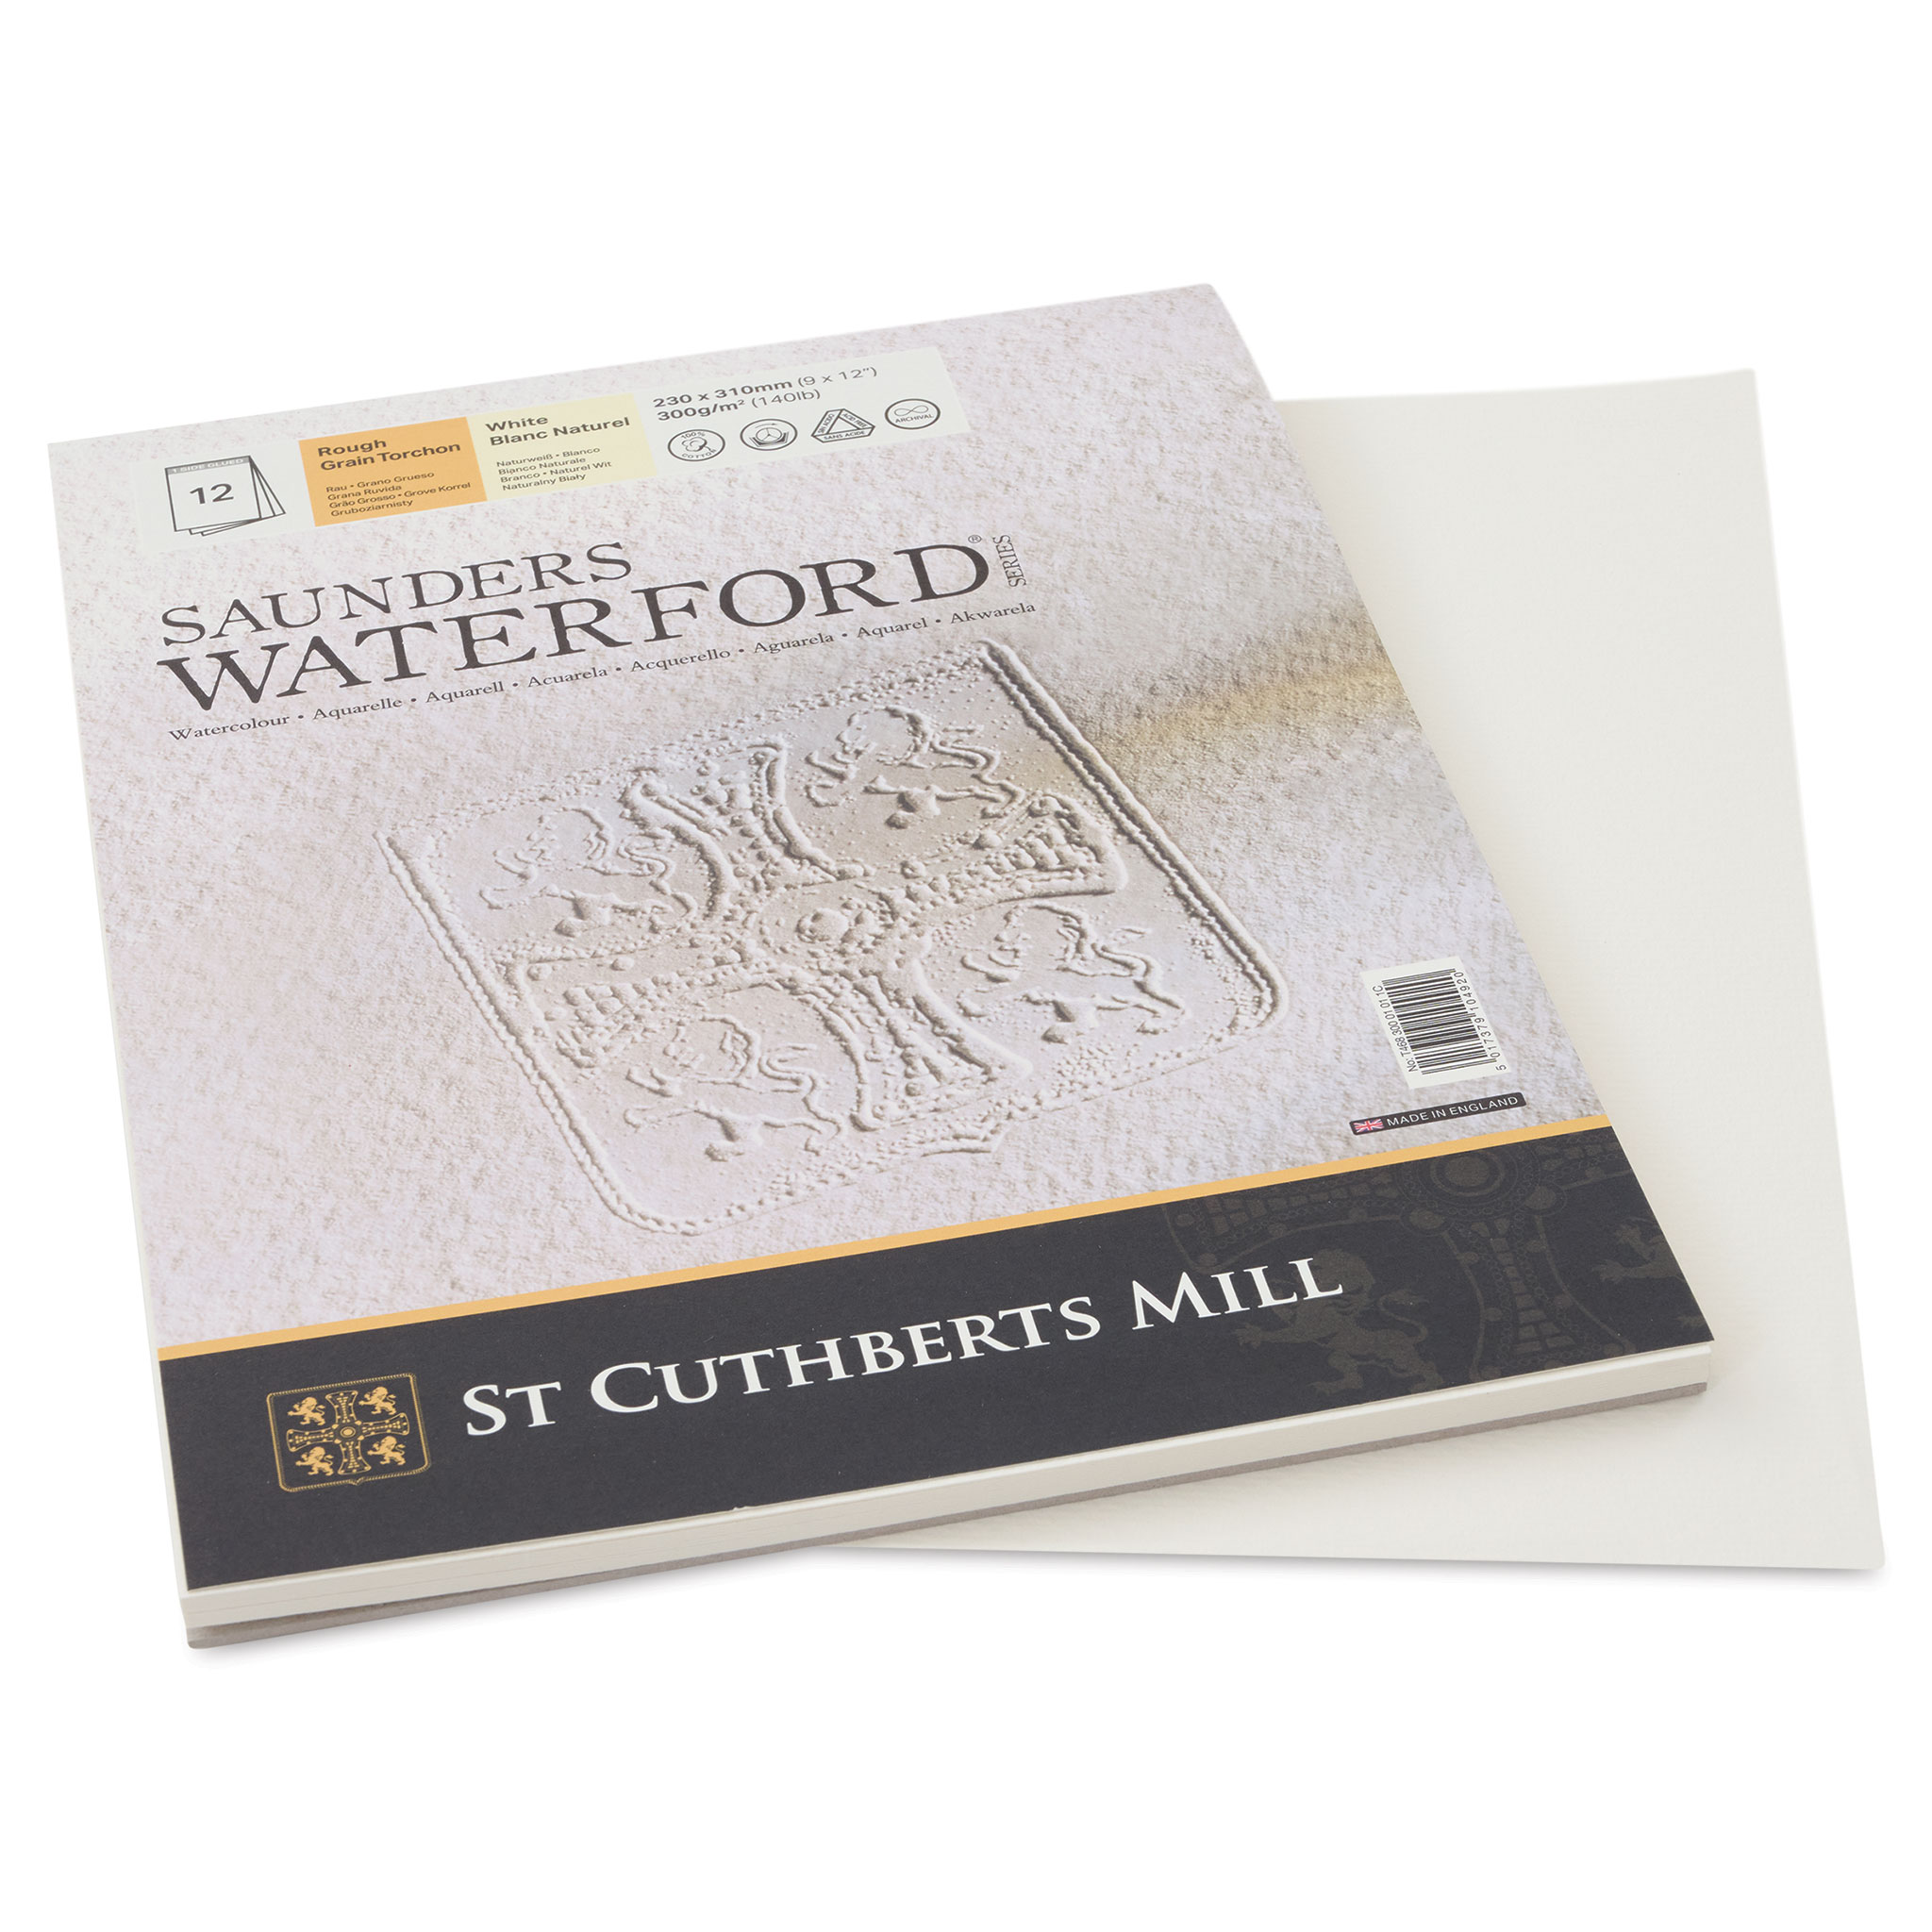 Saunders Waterford Watercolor Pad - 12 x 16, Rough, 140 lb, 12 Sheets